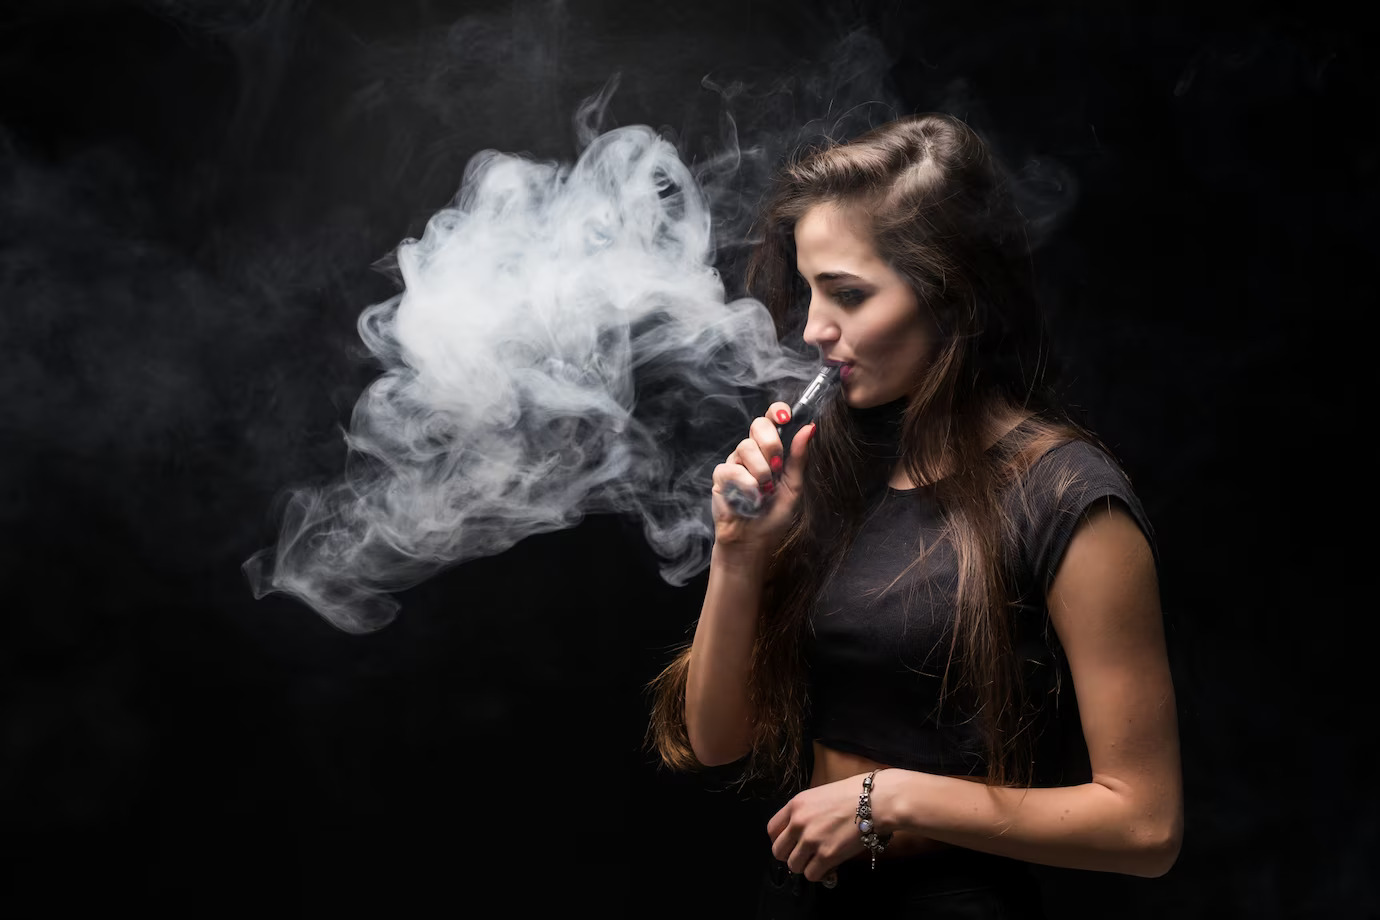 Protecting Public Health: Dallas Considers Wider Vaping Restrictions